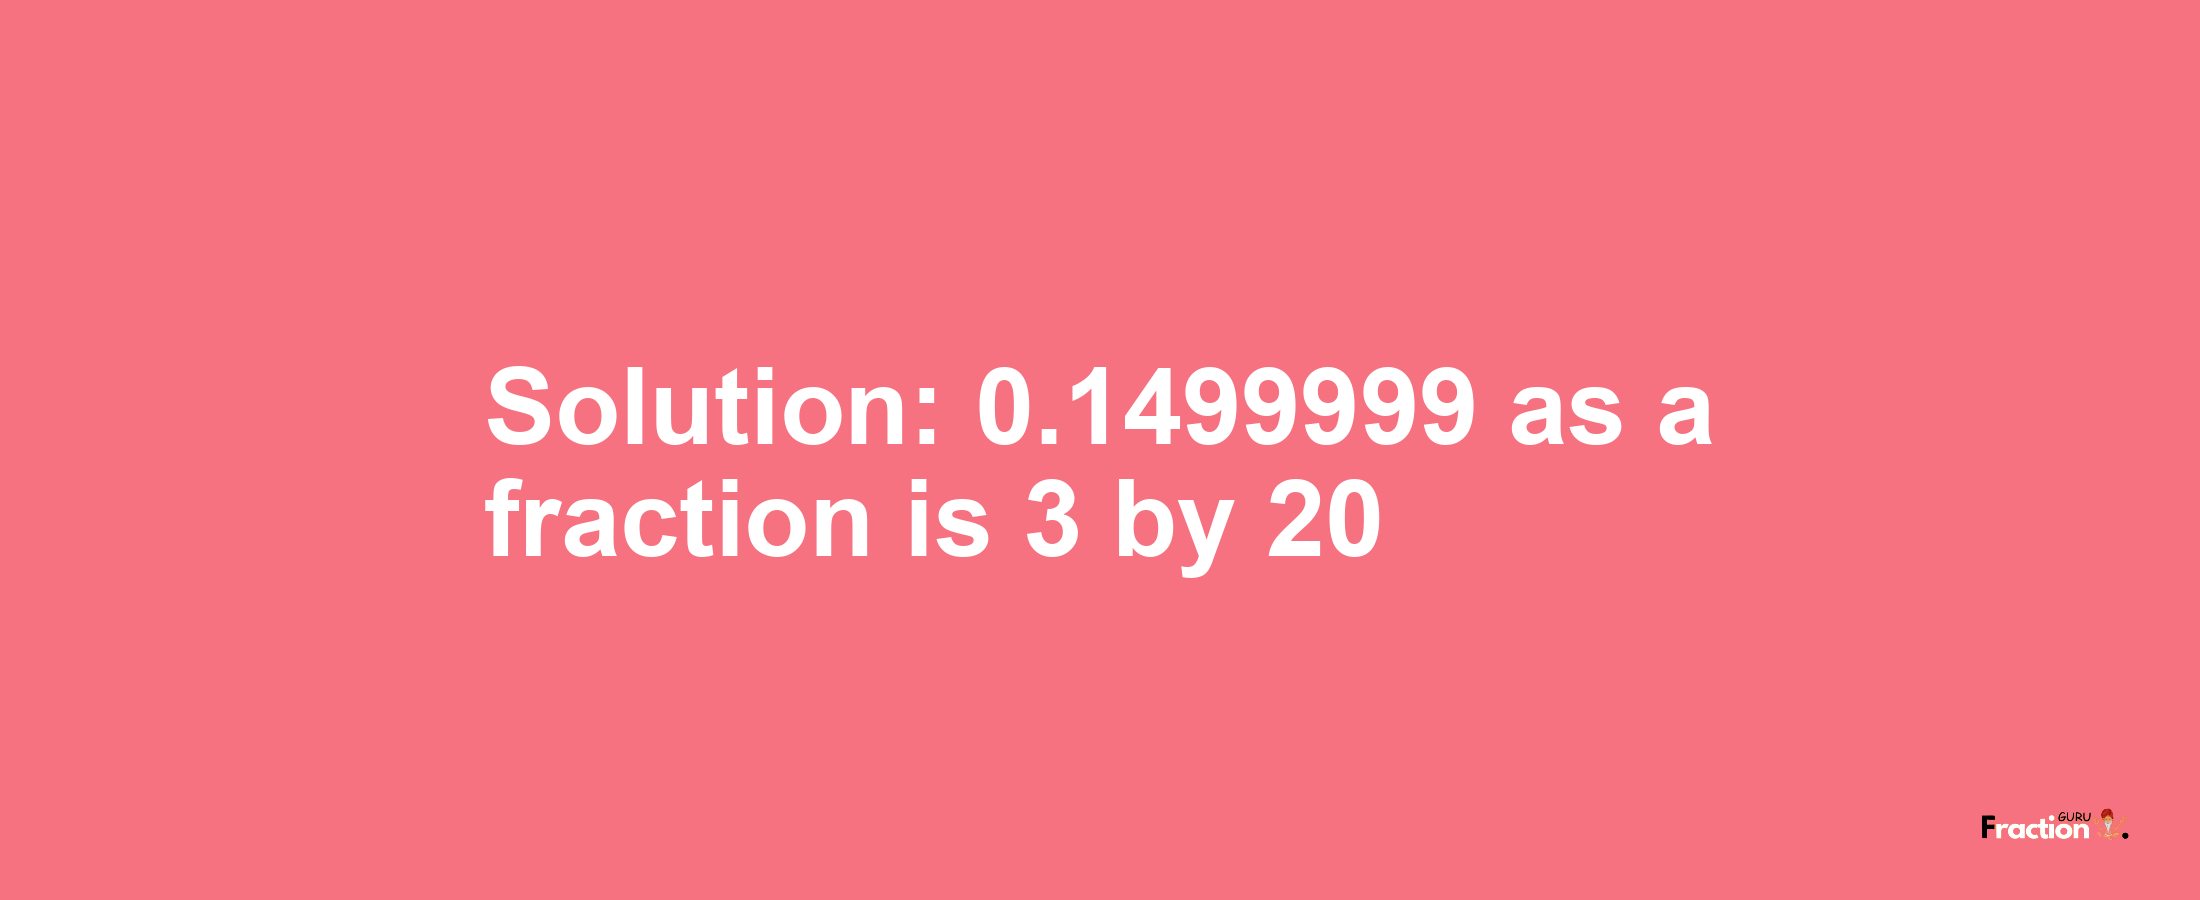 Solution:0.1499999 as a fraction is 3/20